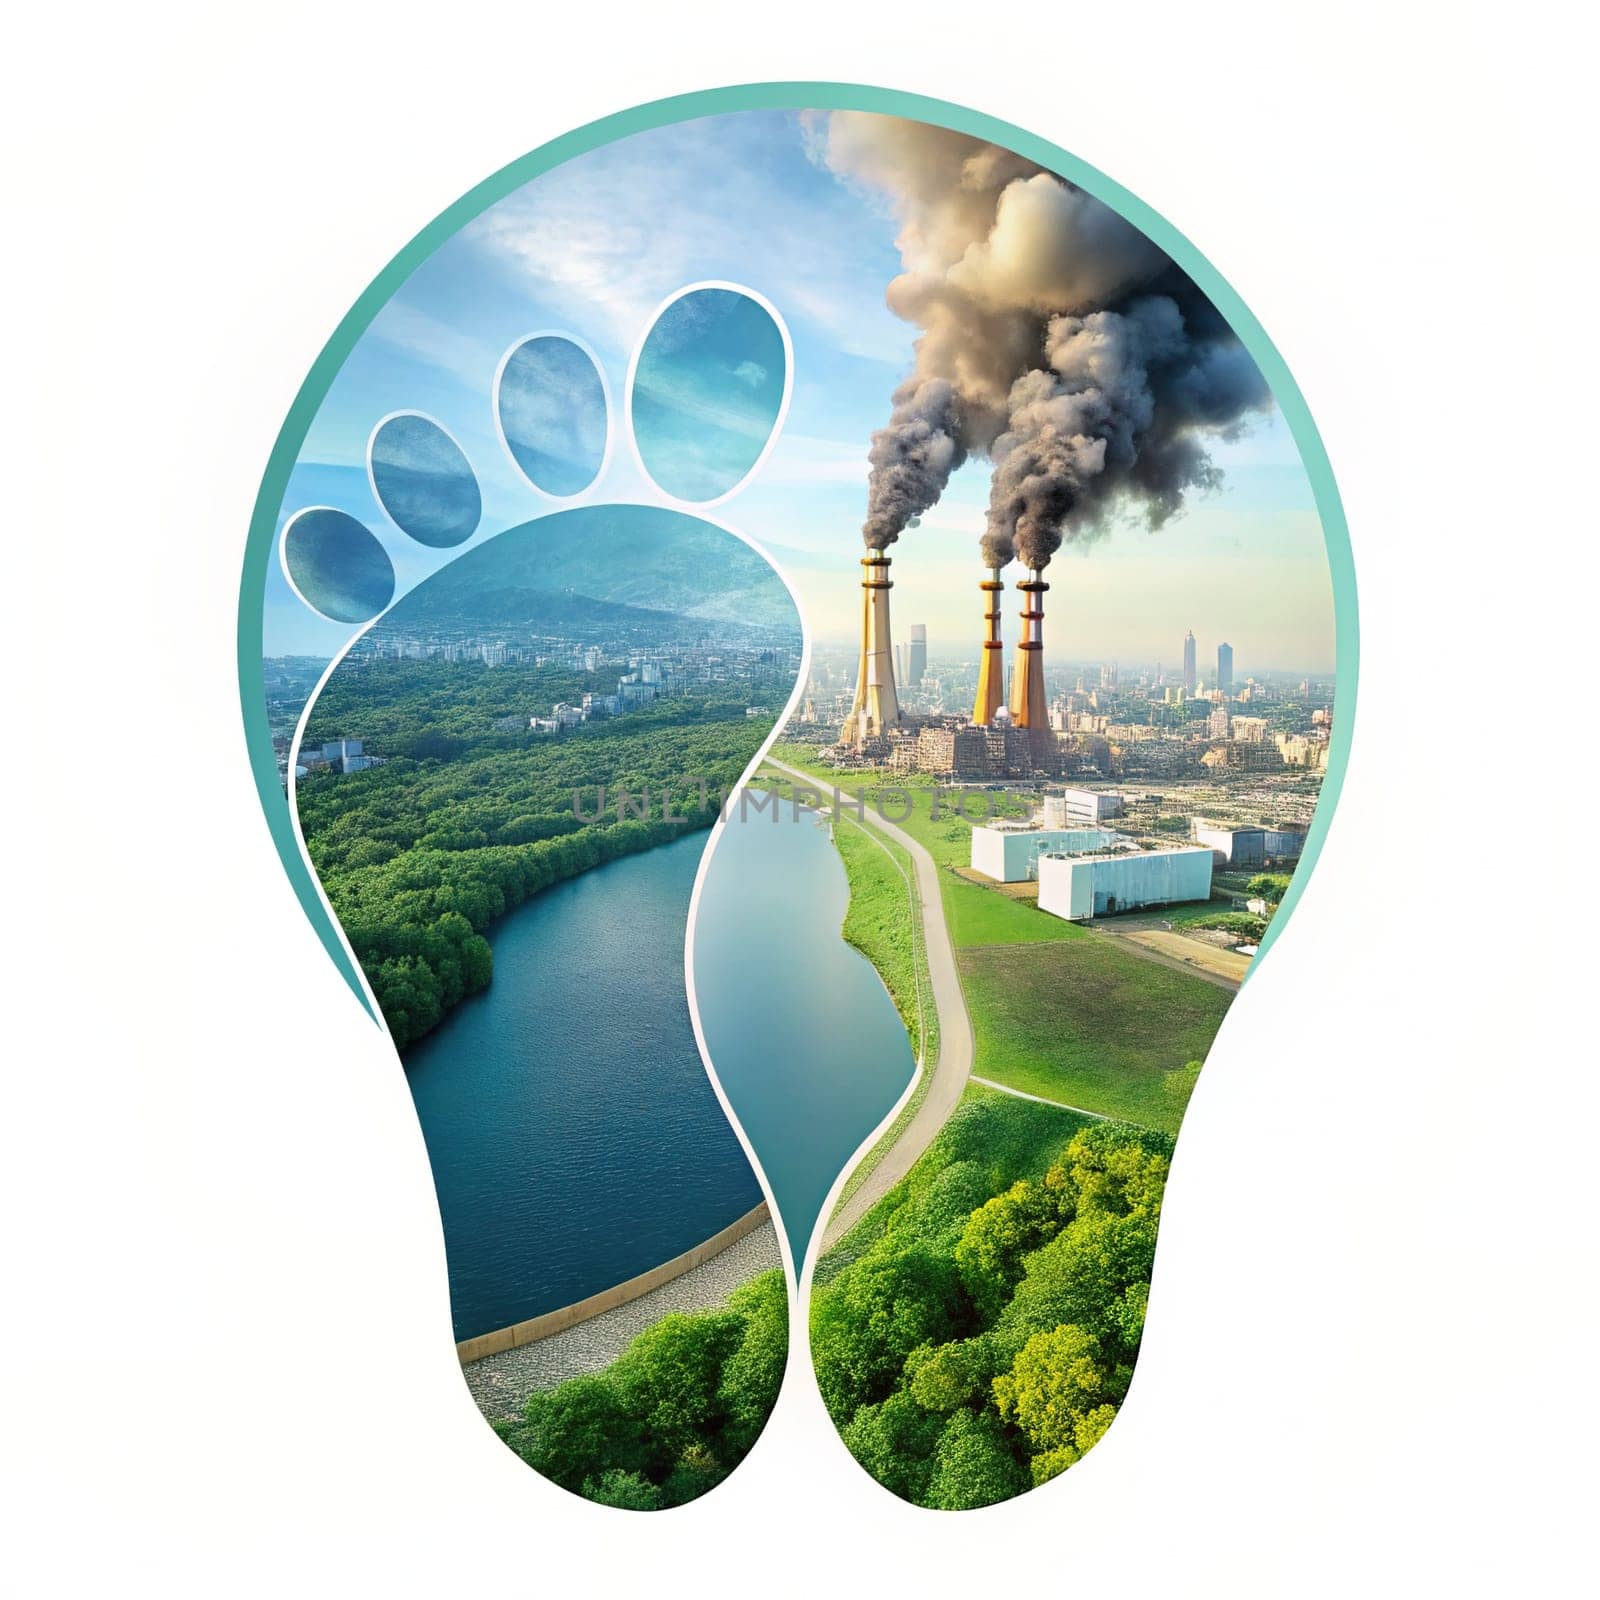 Carbon footprint that endangers natural life by causing global warming